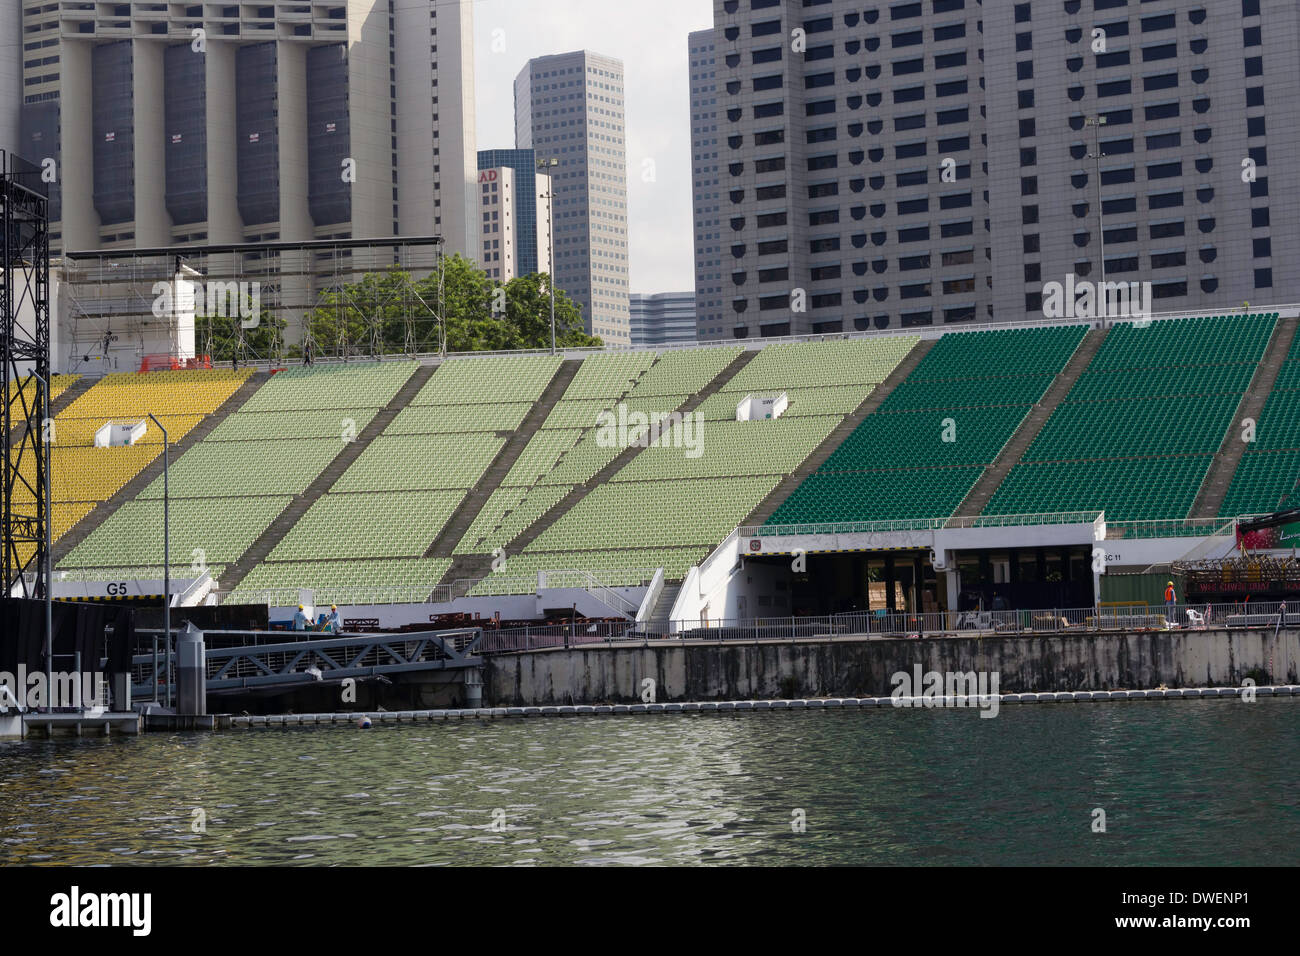 Floating platform in the Marina Bay area in Singapore, also known as The Float at Marina Bay, meant to seat 30,000 people Stock Photo